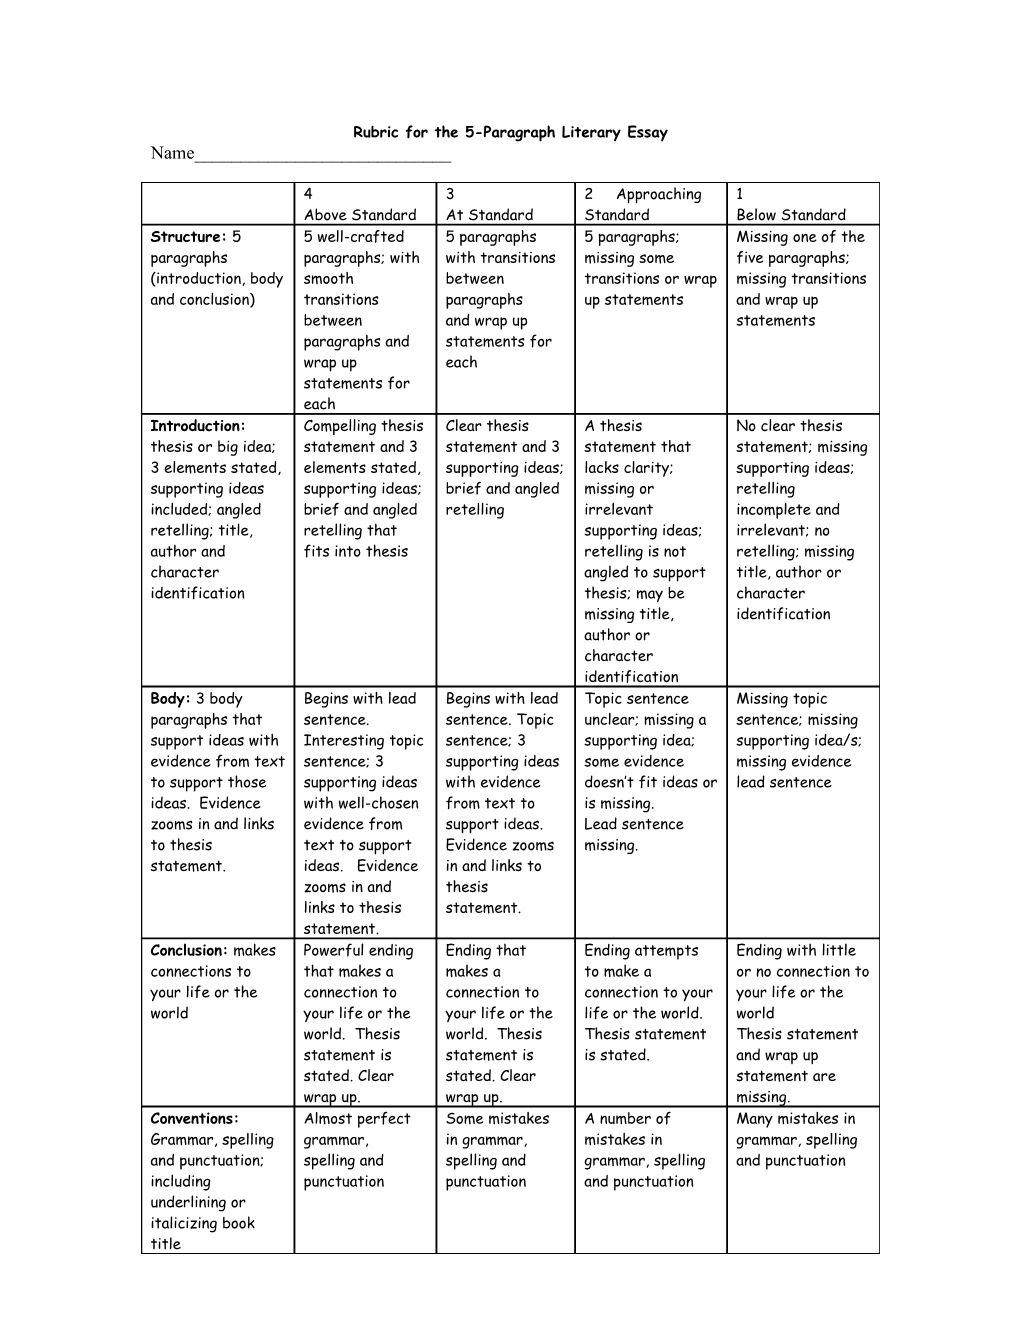 Rubric for the 5-Paragraph Literary Essay